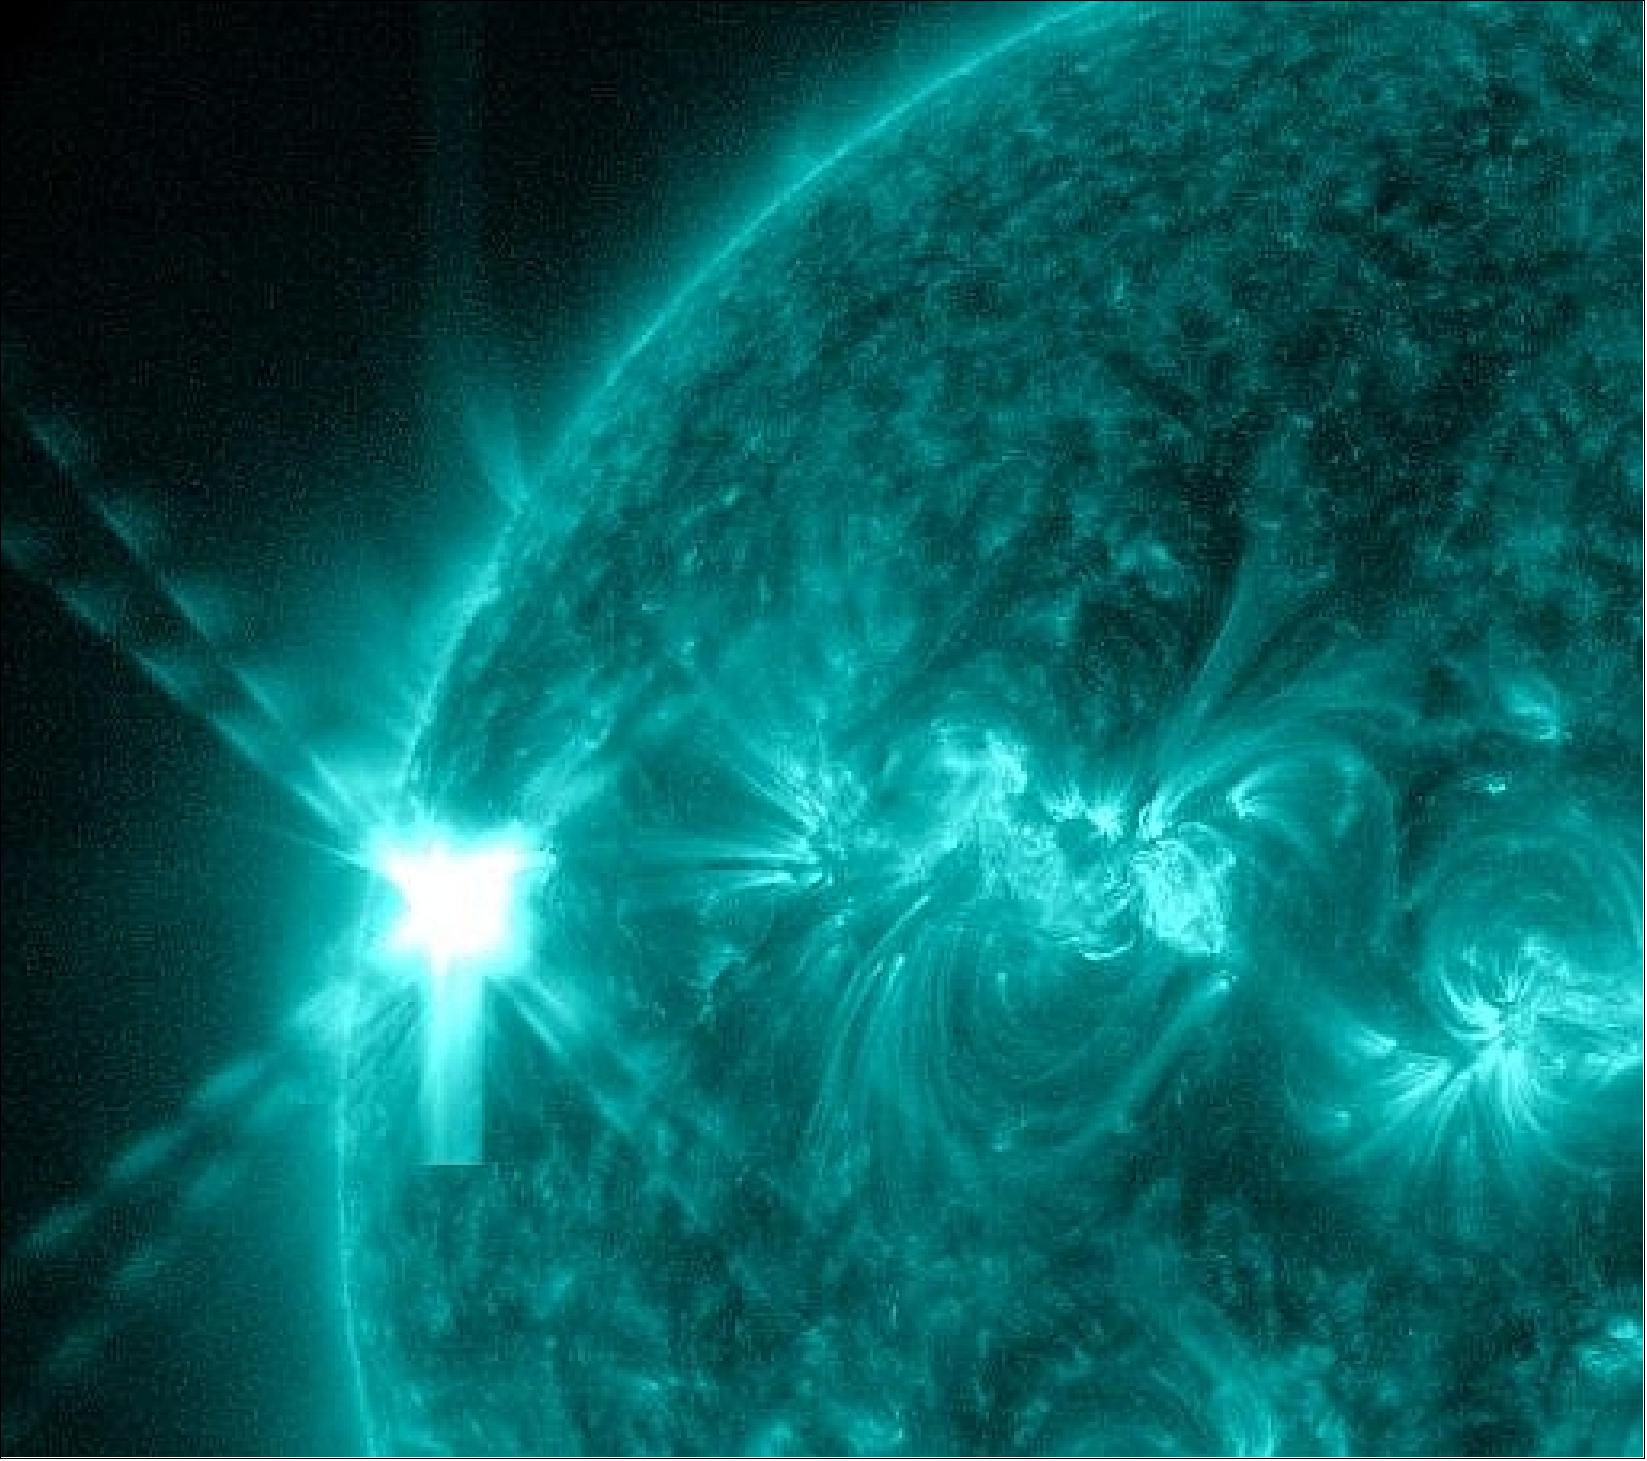 Figure 30: An X3.2-class flare observed by SDO’s AIA instrument at 0114 UT, 14 May 2013 (NASA/SDO/AIA)